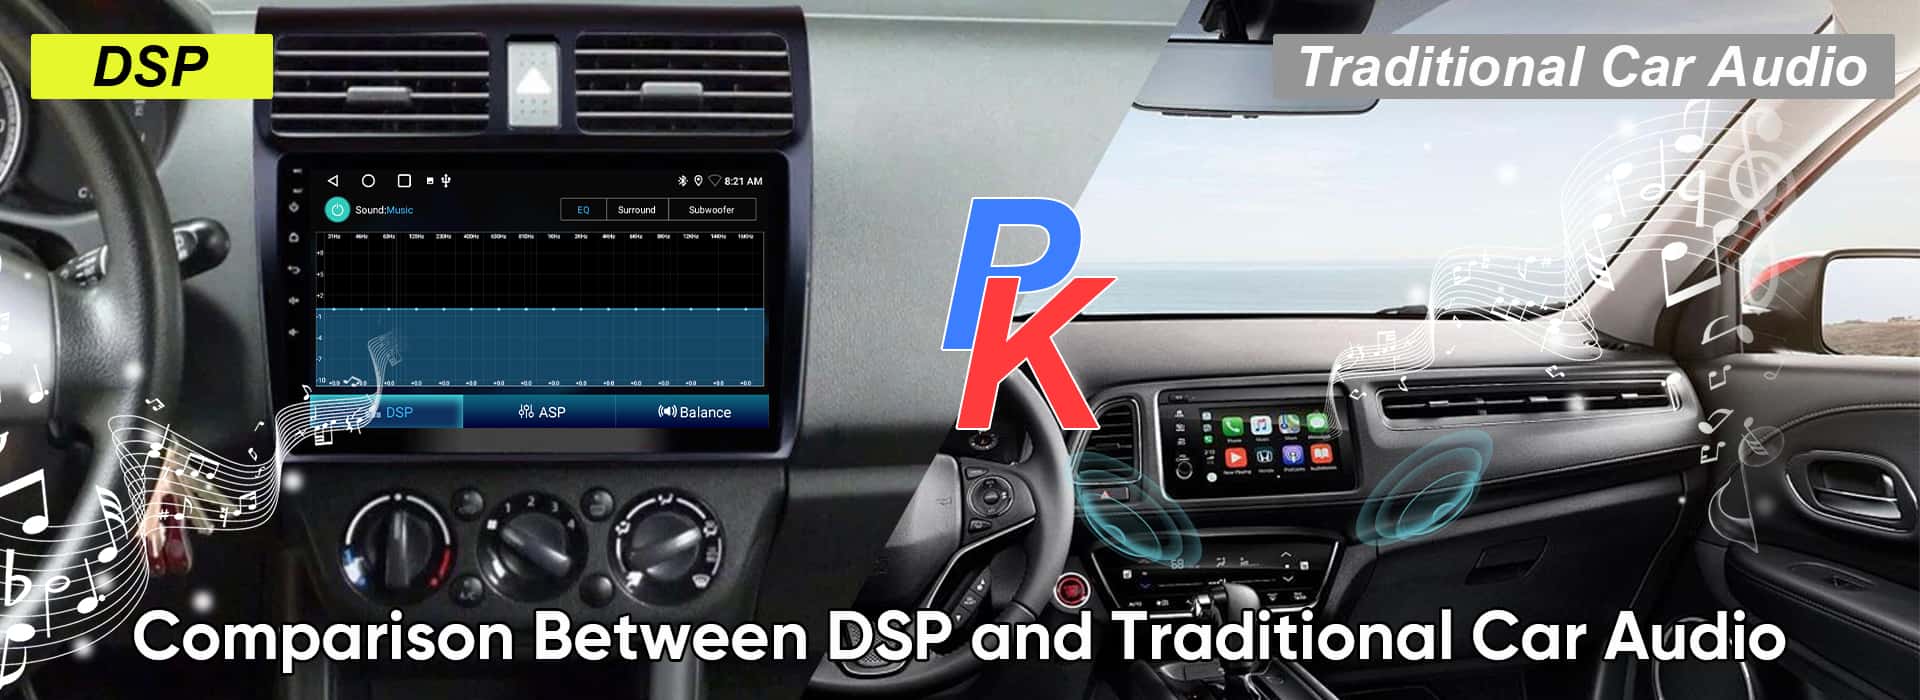 Comparison Between DSP and Traditional Car Audio